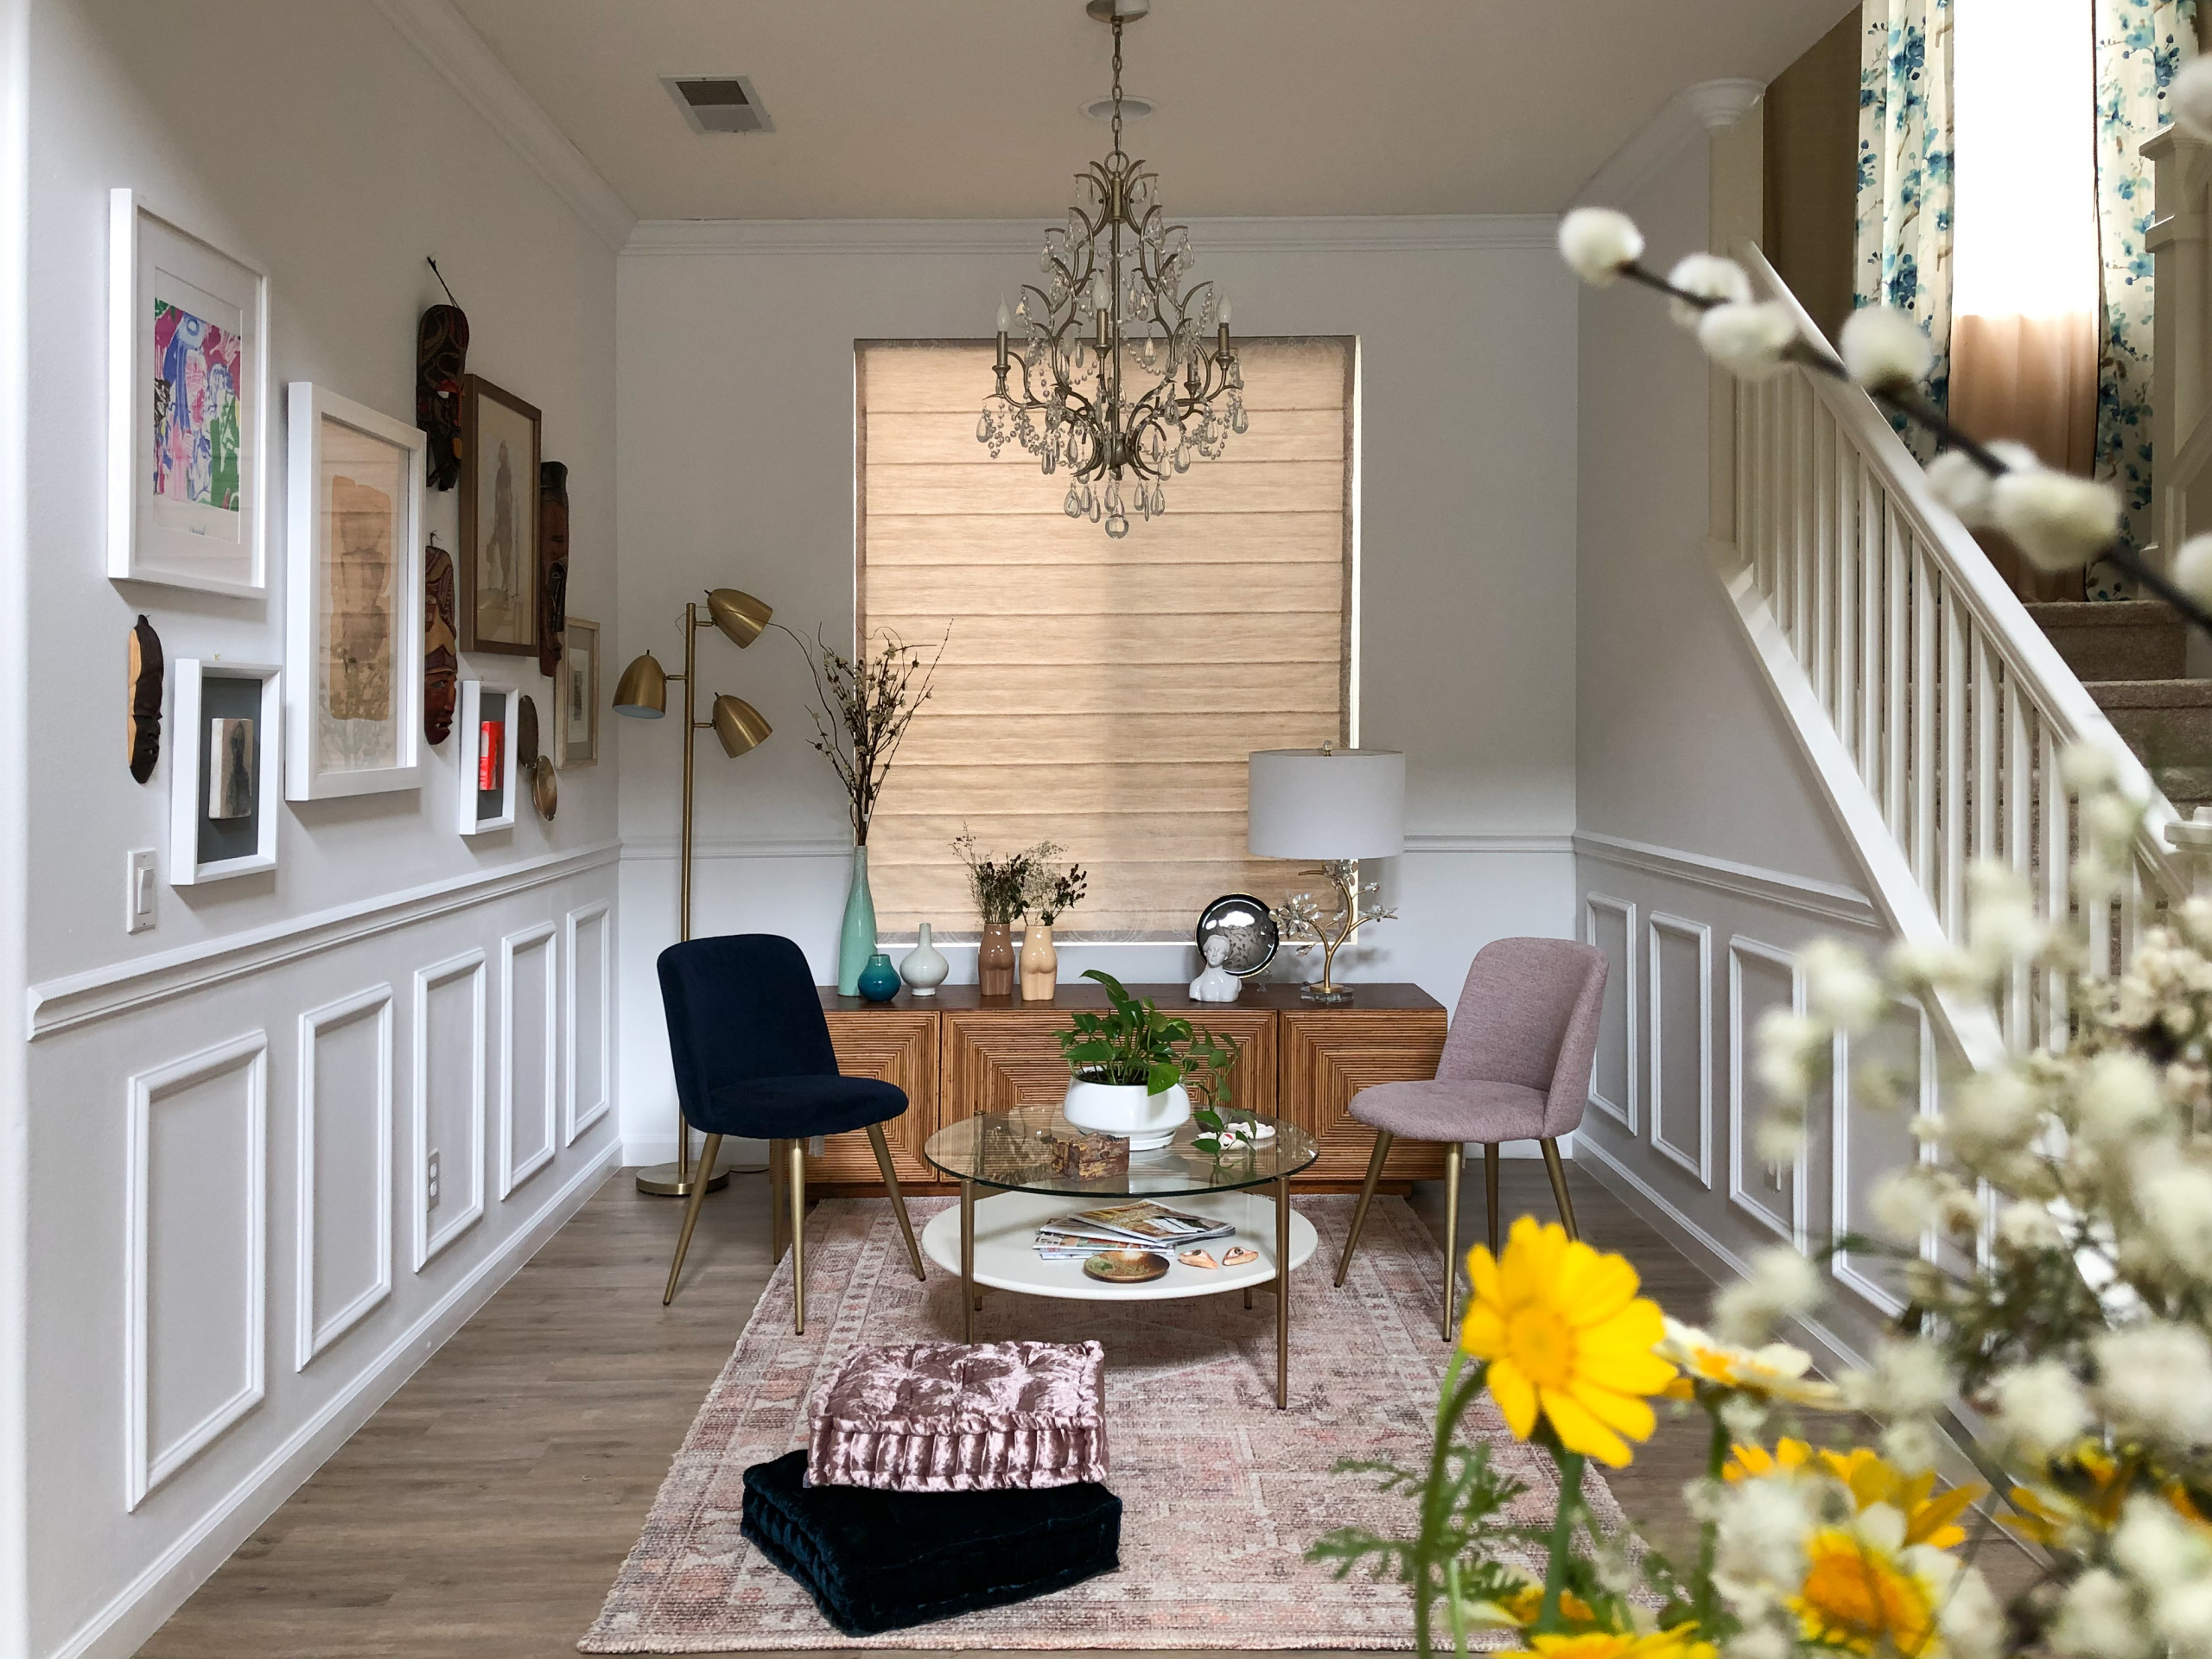 75 Living Room with White Walls Ideas You'll Love - April, 2023 | Houzz